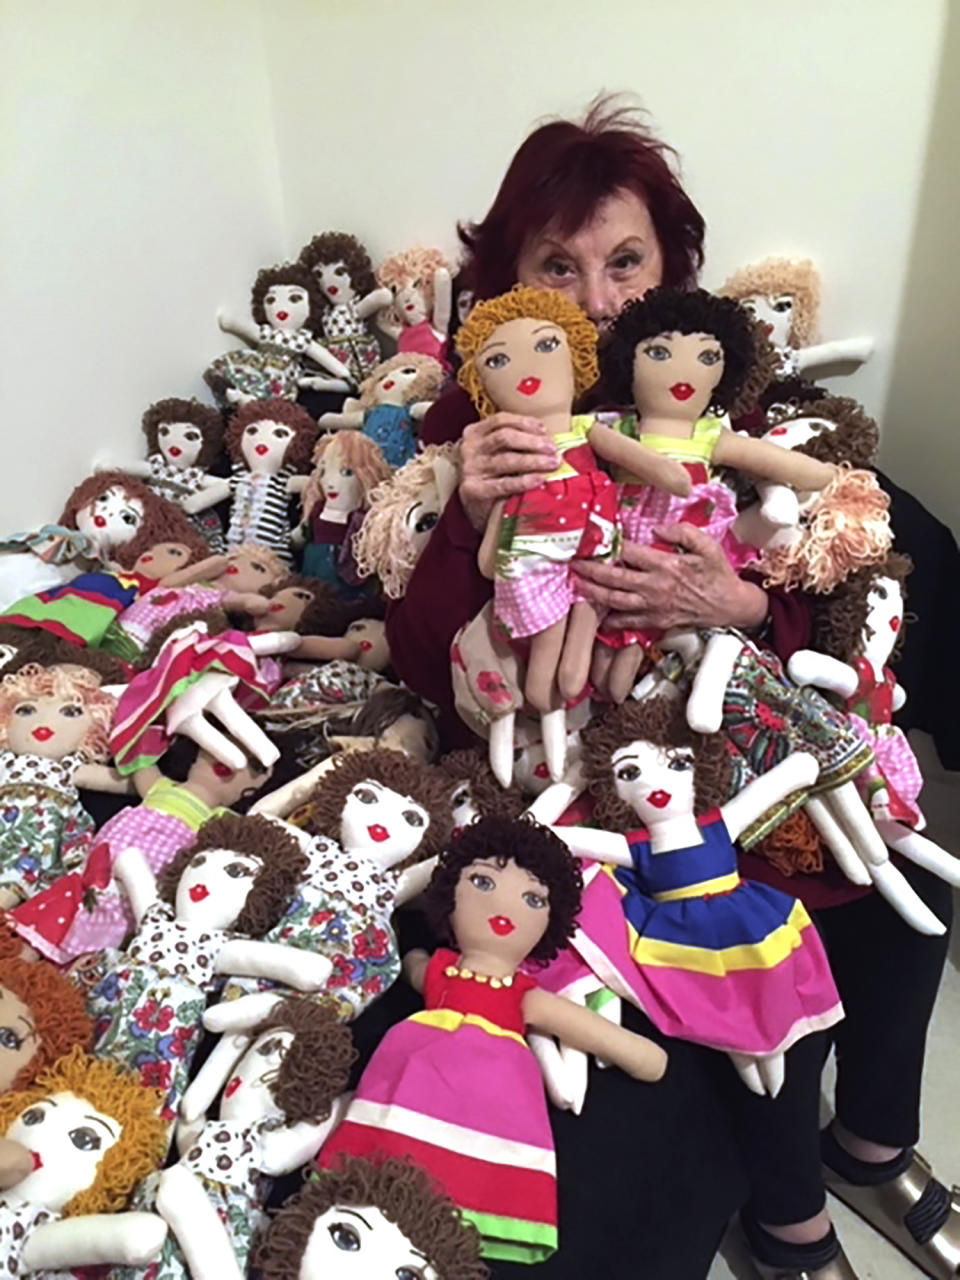 In this photo provided by Lebanese painter Yolande Labaki, Labaki, 93, holds dolls at her house in Beirut, Lebanon, Monday, Nov. 16, 2020, that she made to be distributed to children who might have lost their toys amid the destruction or who had otherwise had their lives touched by the Beirut seaport blast in August 2020. After the massive explosion devastated Beirut, Labaki made 100 dolls for children affected by the destruction. (Yolande Labaki via AP)